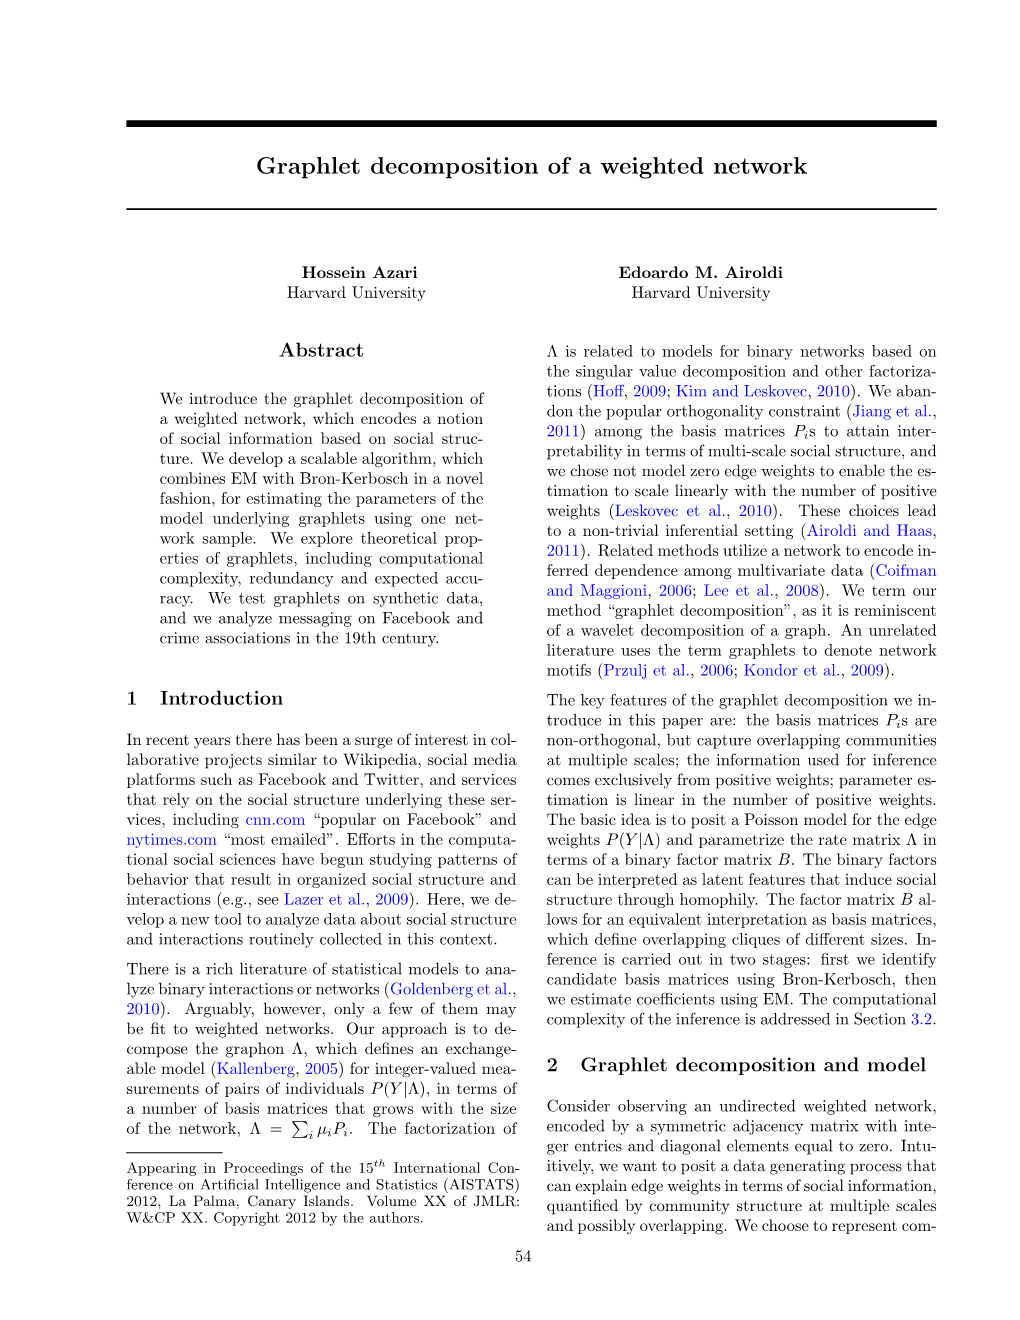 Graphlet Decomposition of a Weighted Network